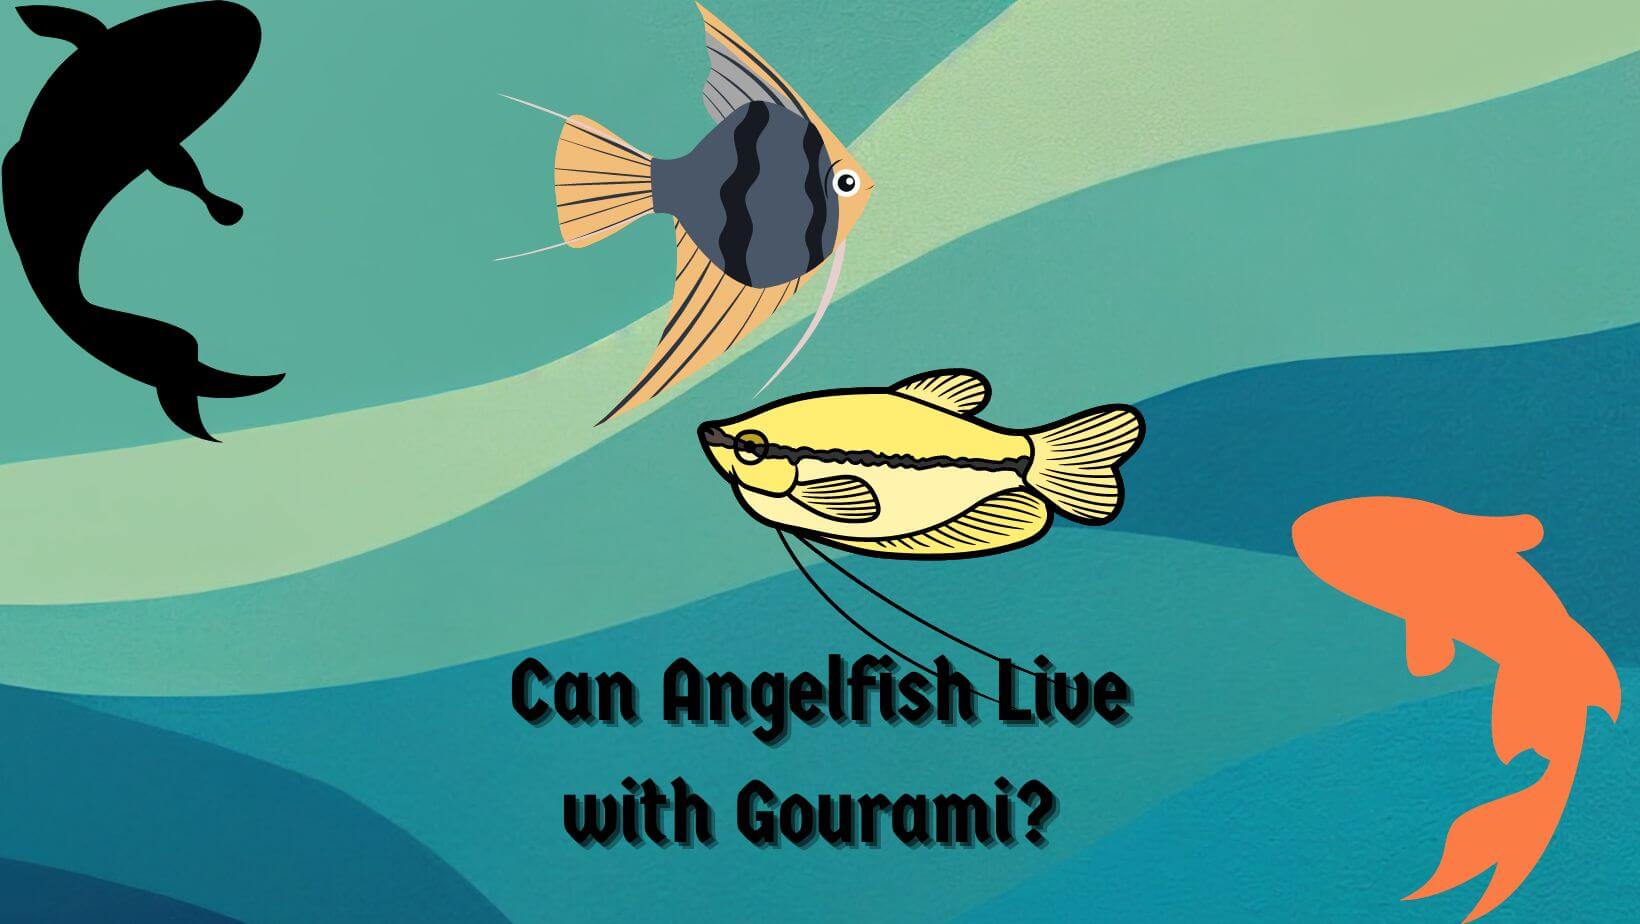 Can Angelfish Live with Gourami?